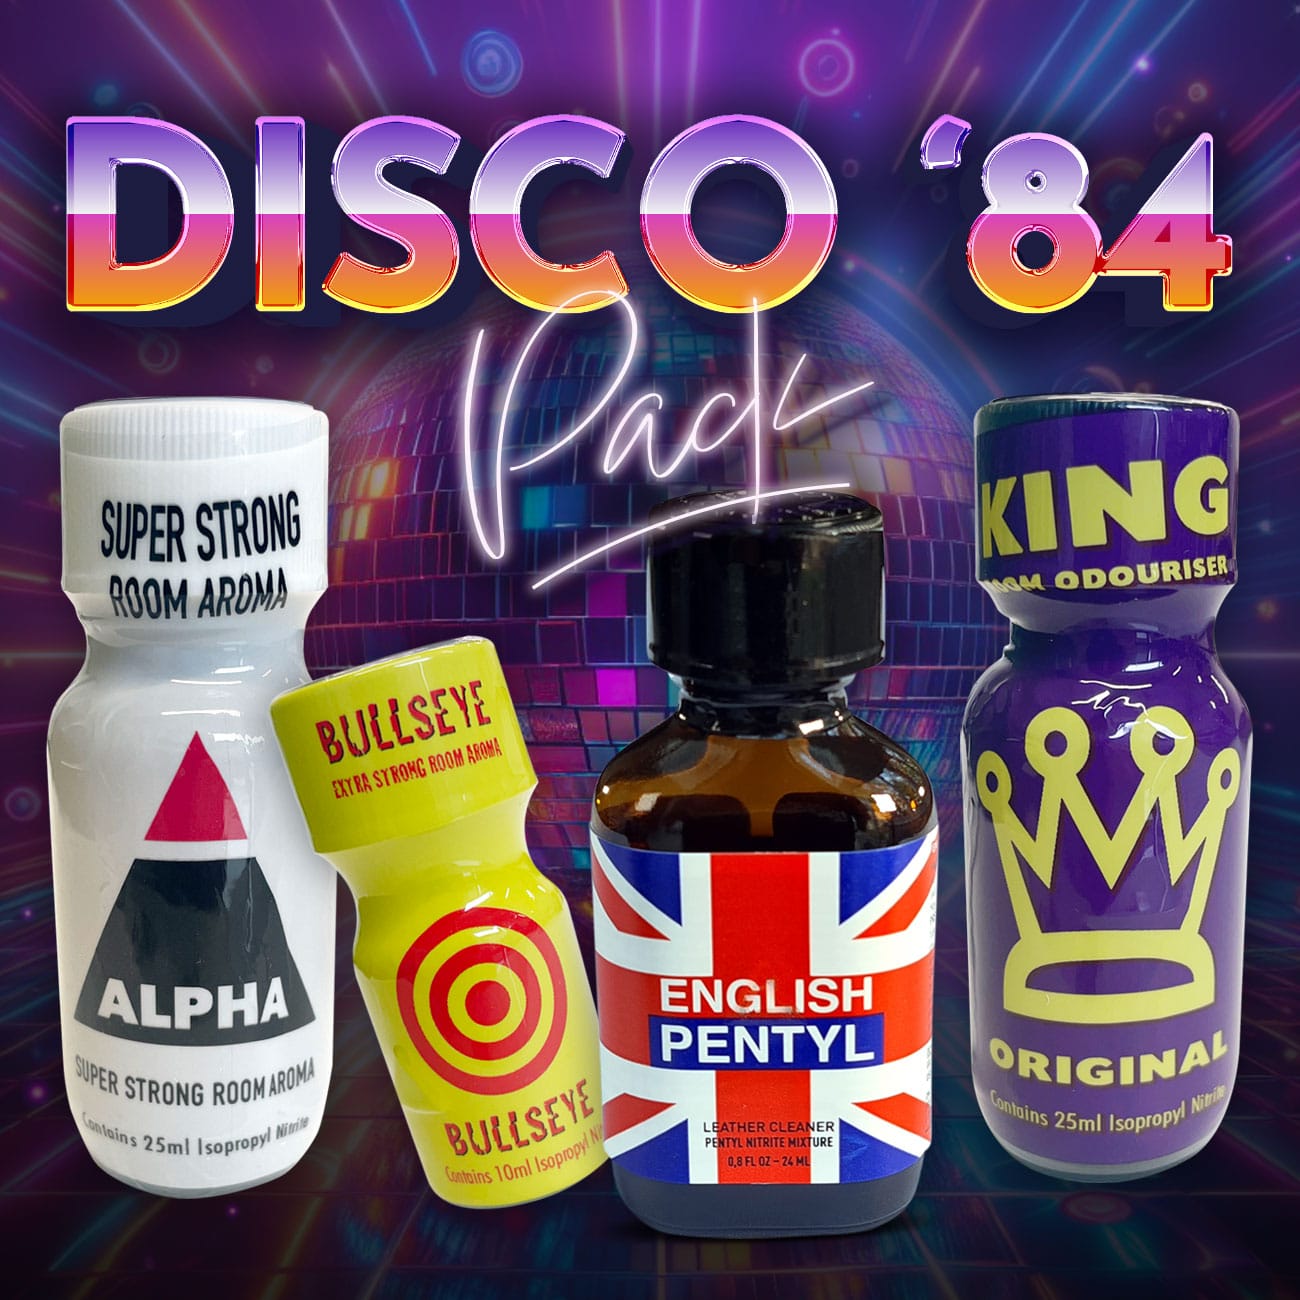 Disco ’84 pack packs prowler poppers